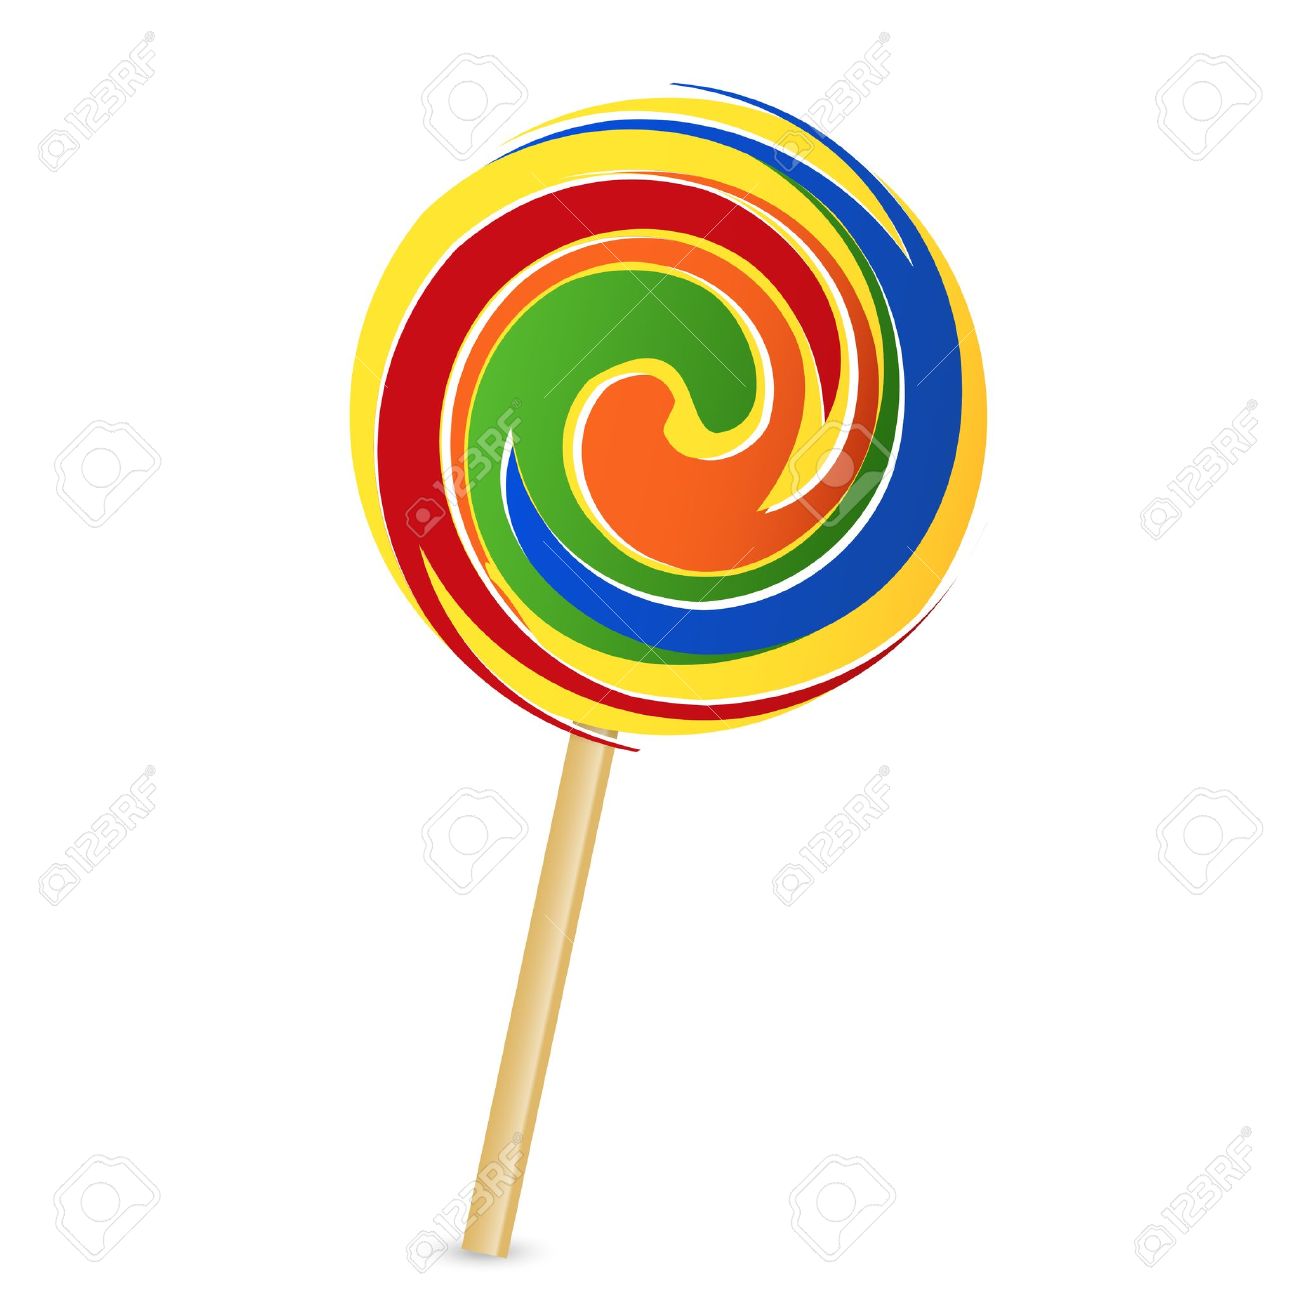 18,942 Lollipop Stock Vector Illustration And Royalty Free.